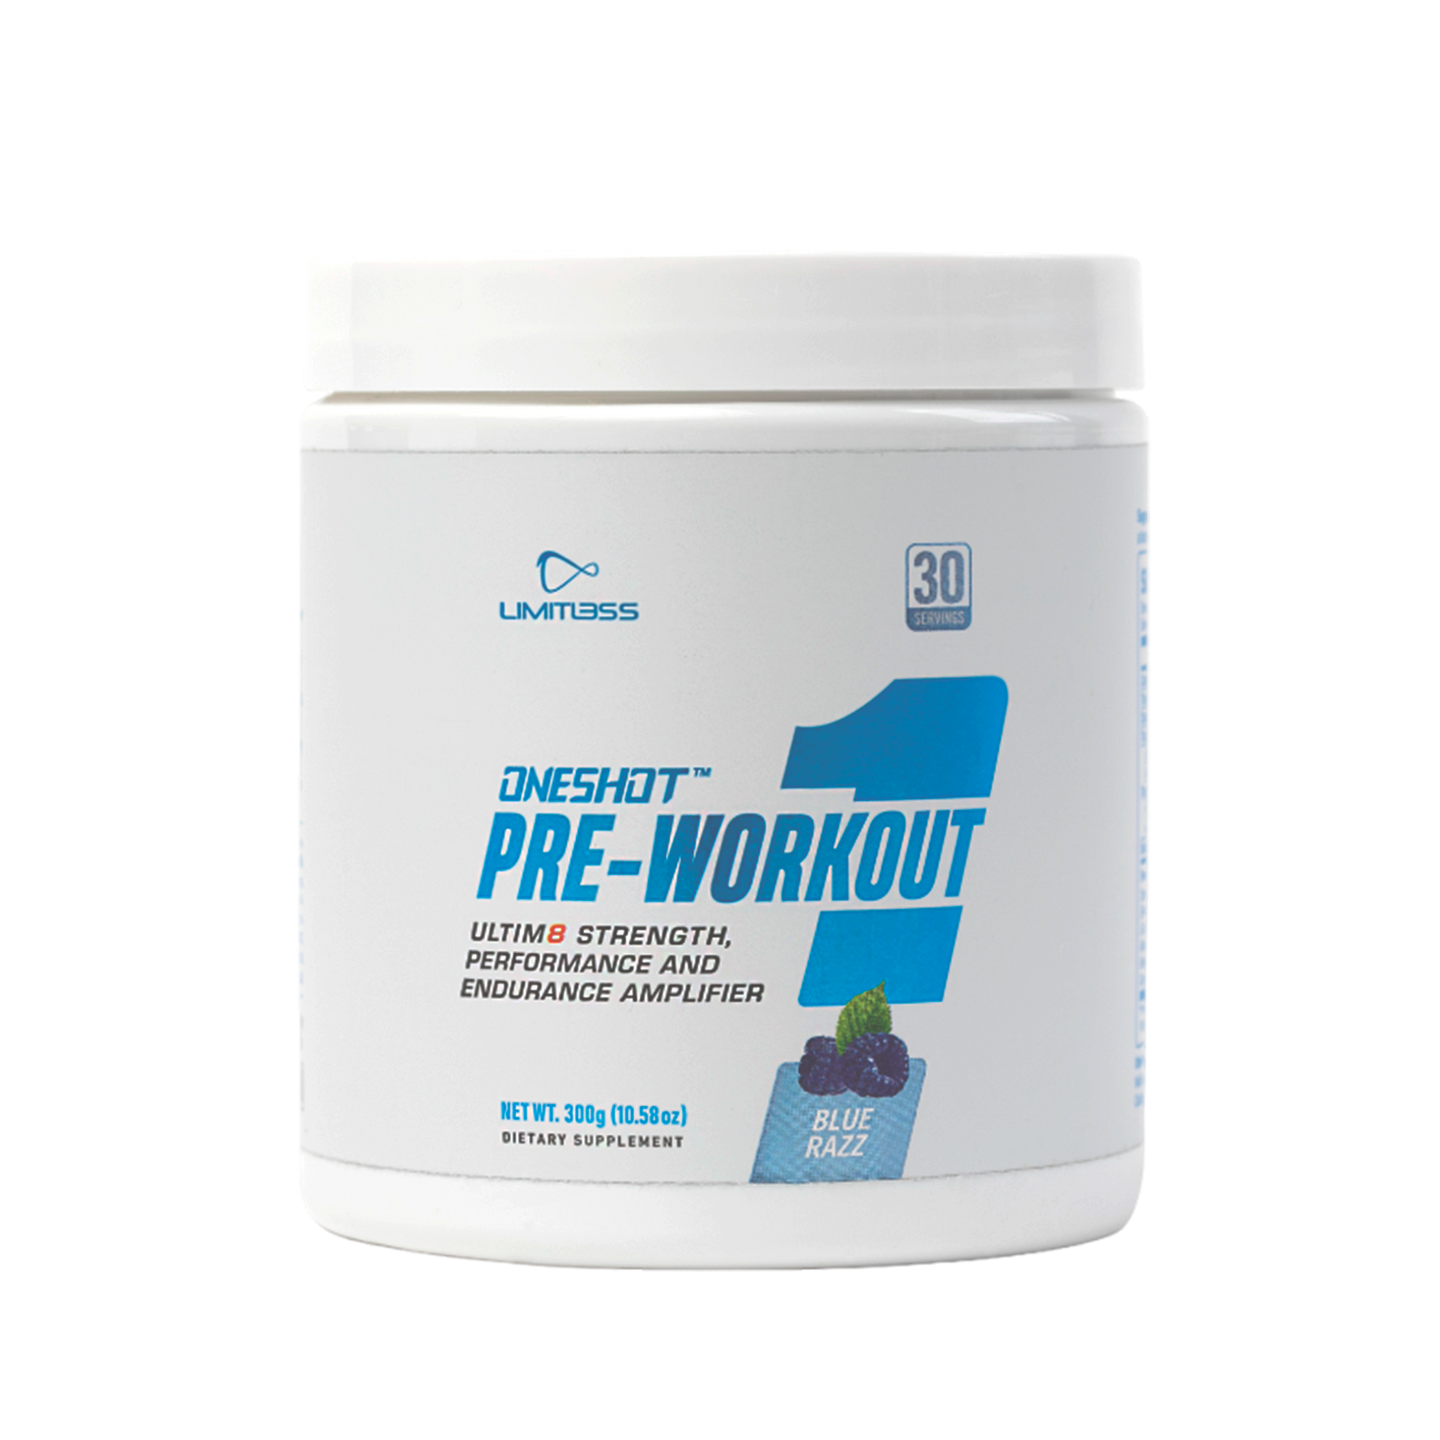 ONESHOT PRE-WORKOUT